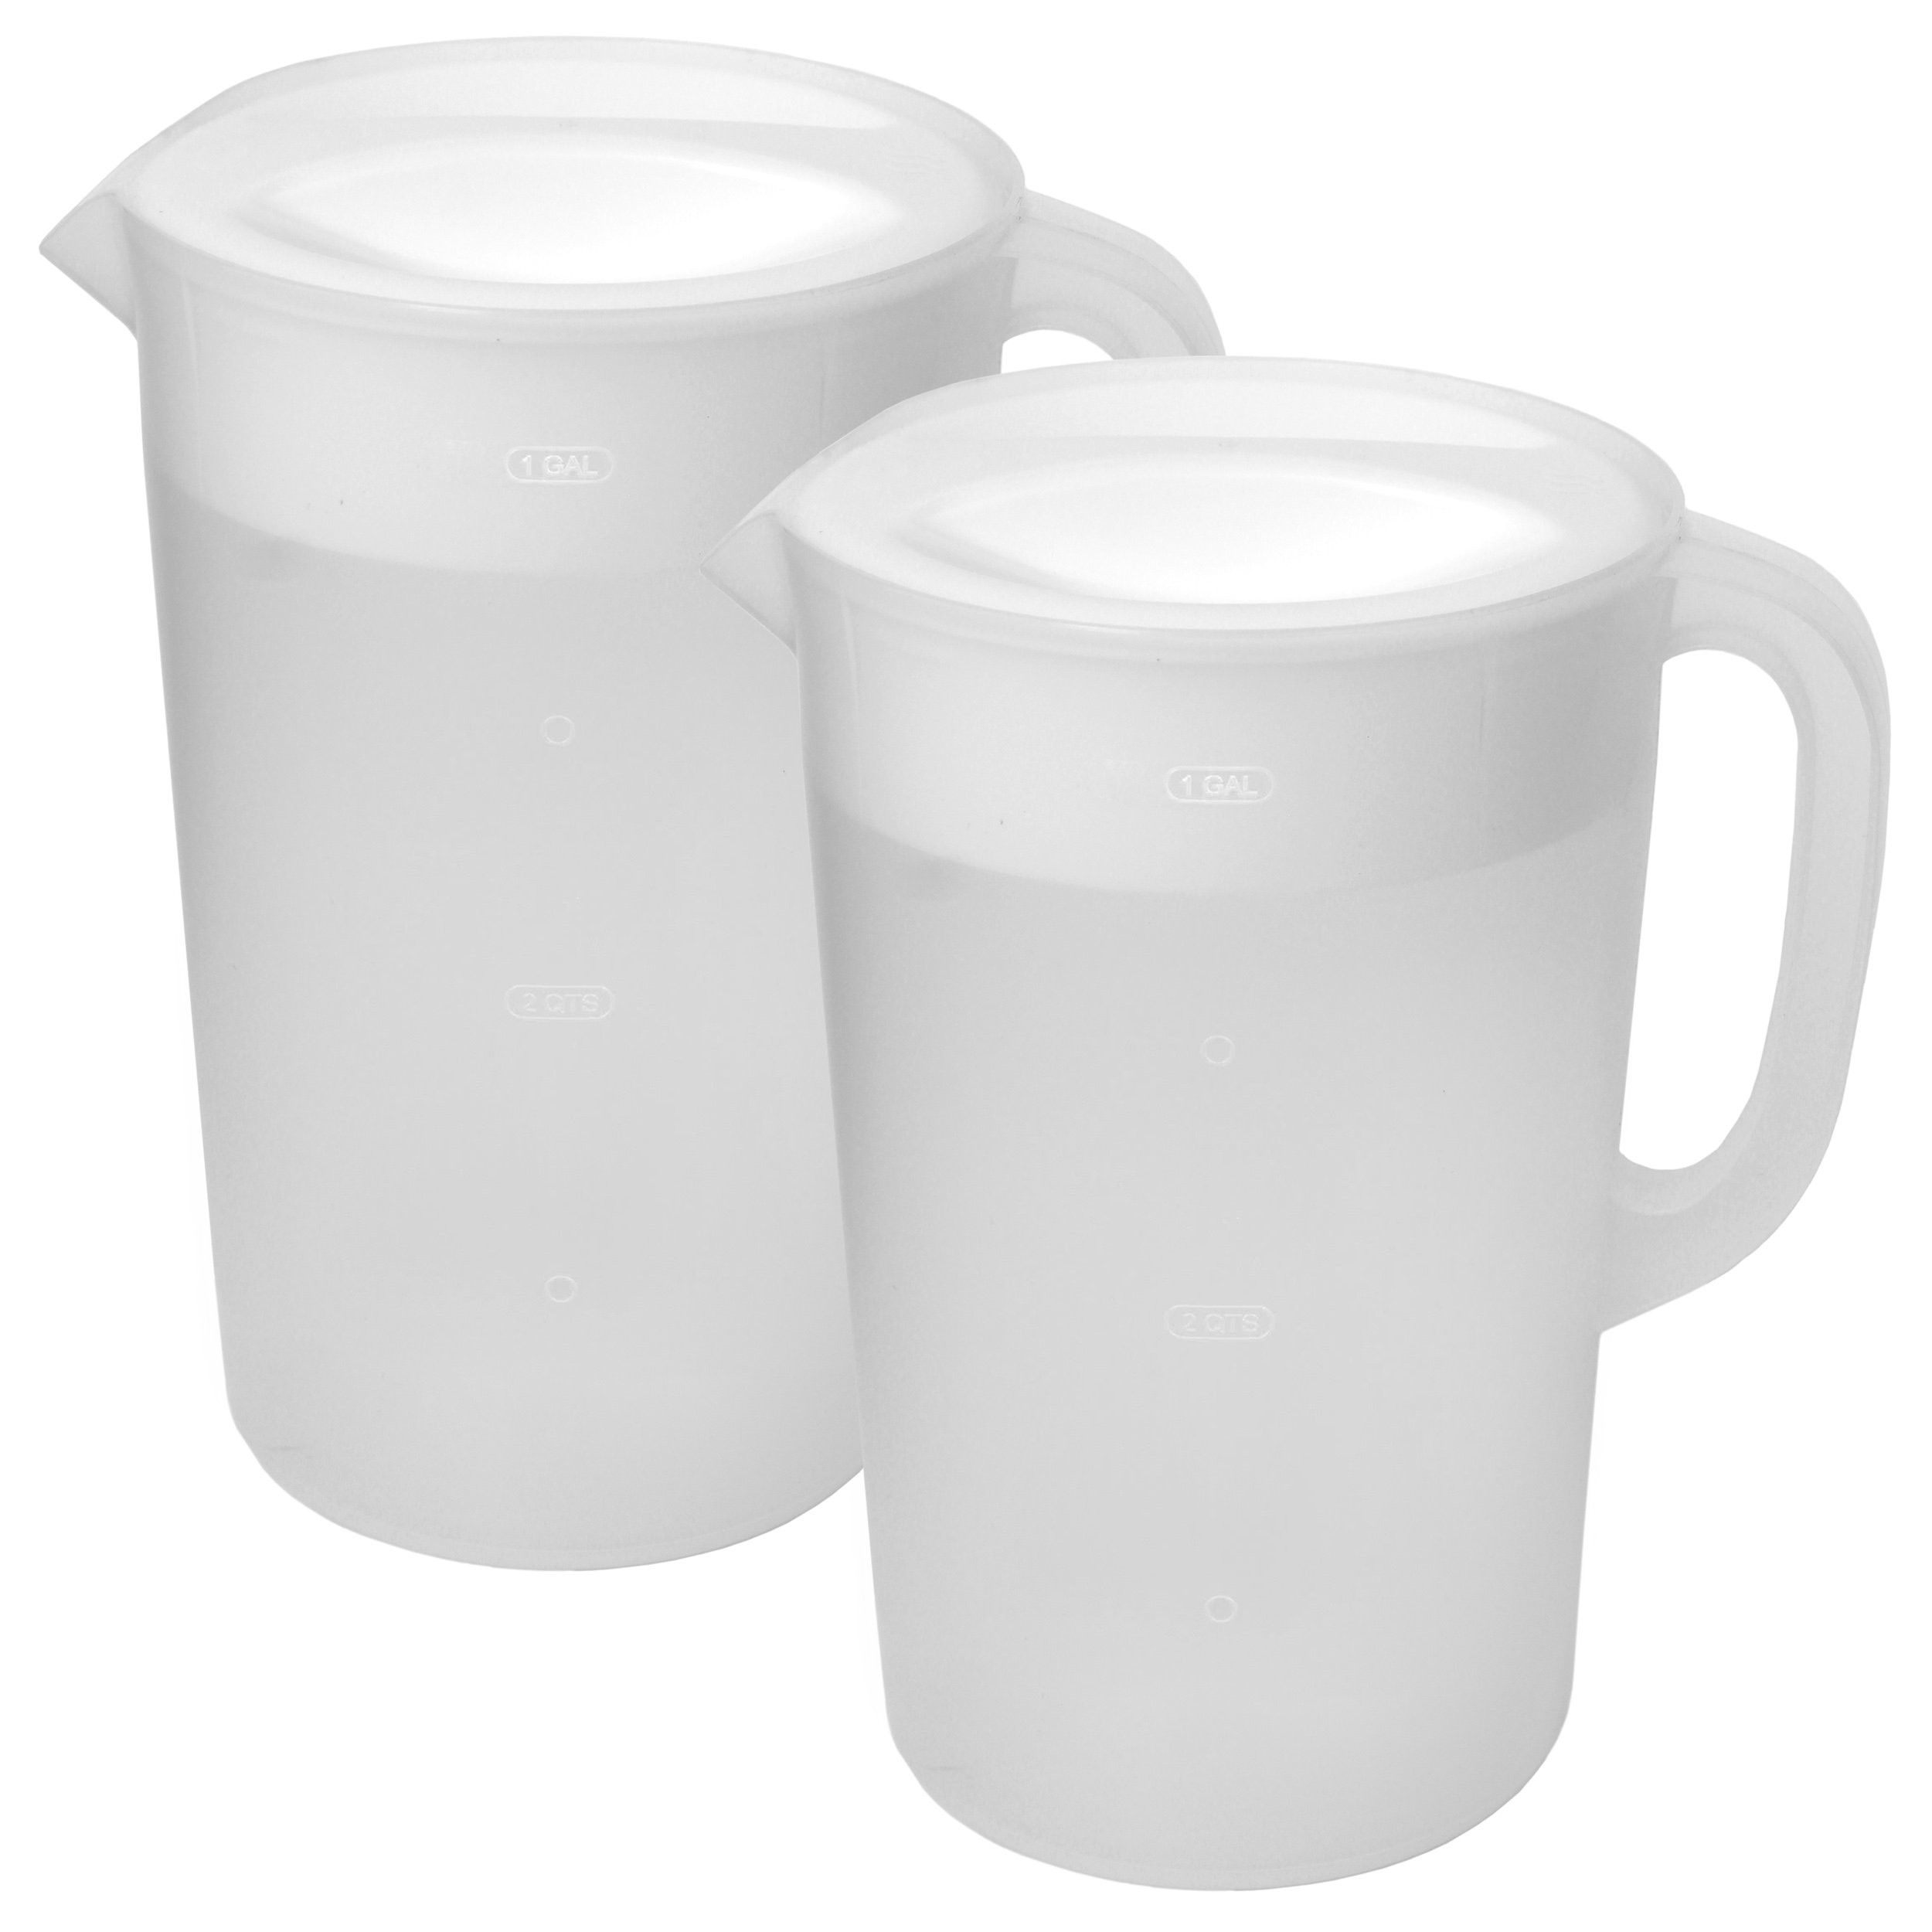 26 Lovely White Milk Jug Vase 2024 free download white milk jug vase of best rated in carafes pitchers helpful customer reviews amazon com intended for rubbermaid clear pitcher 1 gallon 2 pack product image